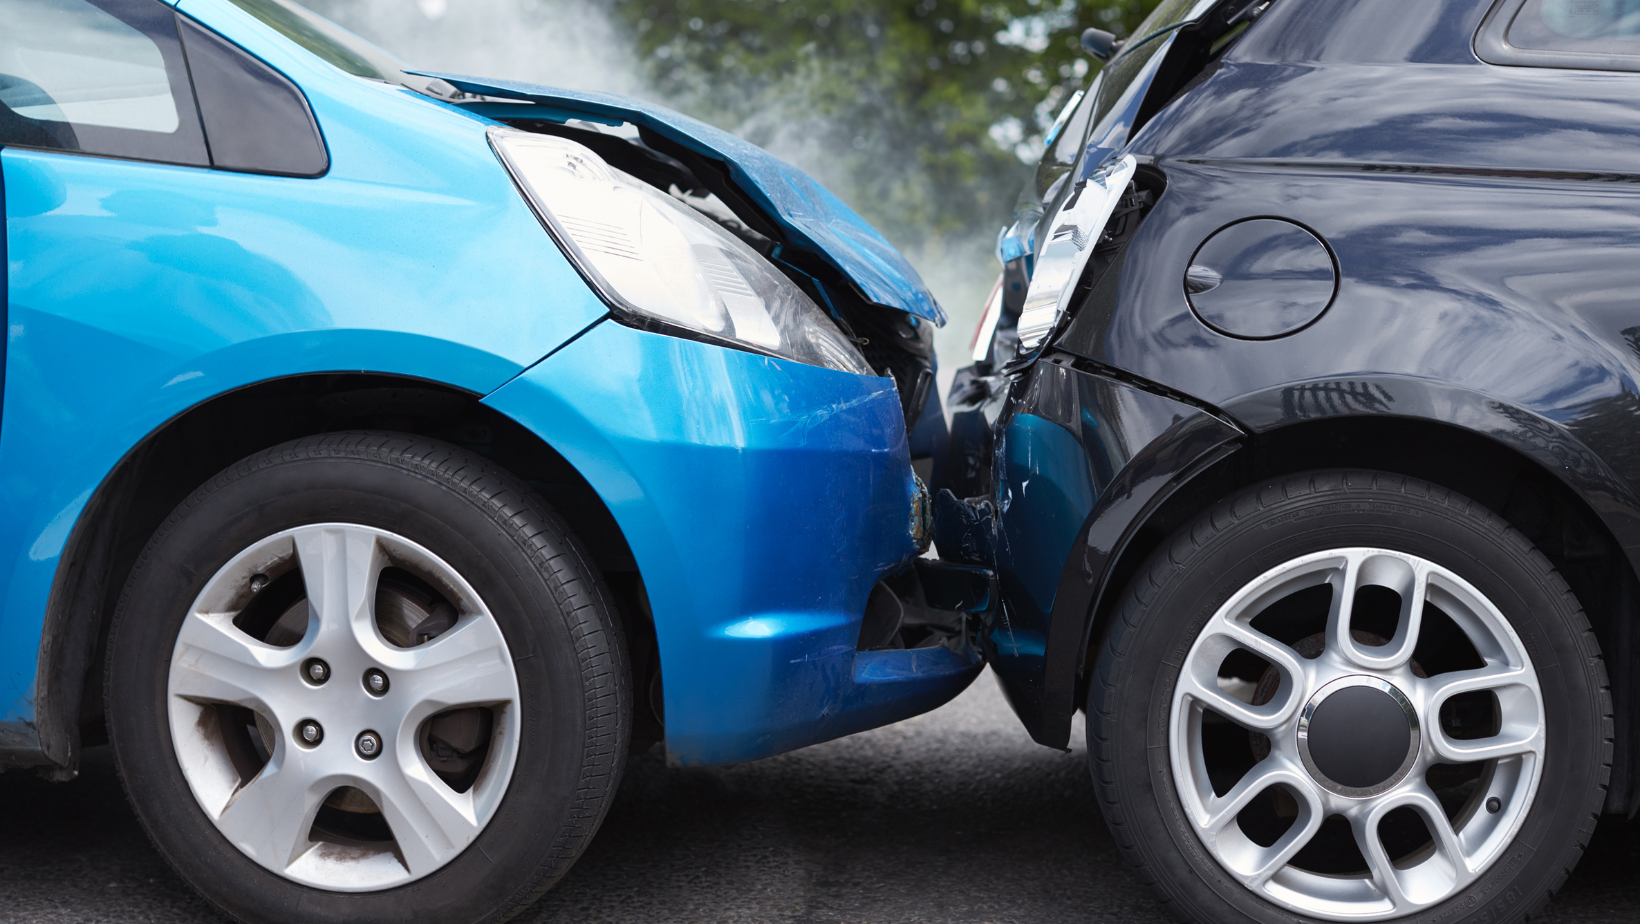 Who pays for car damage in a no-fault accident?